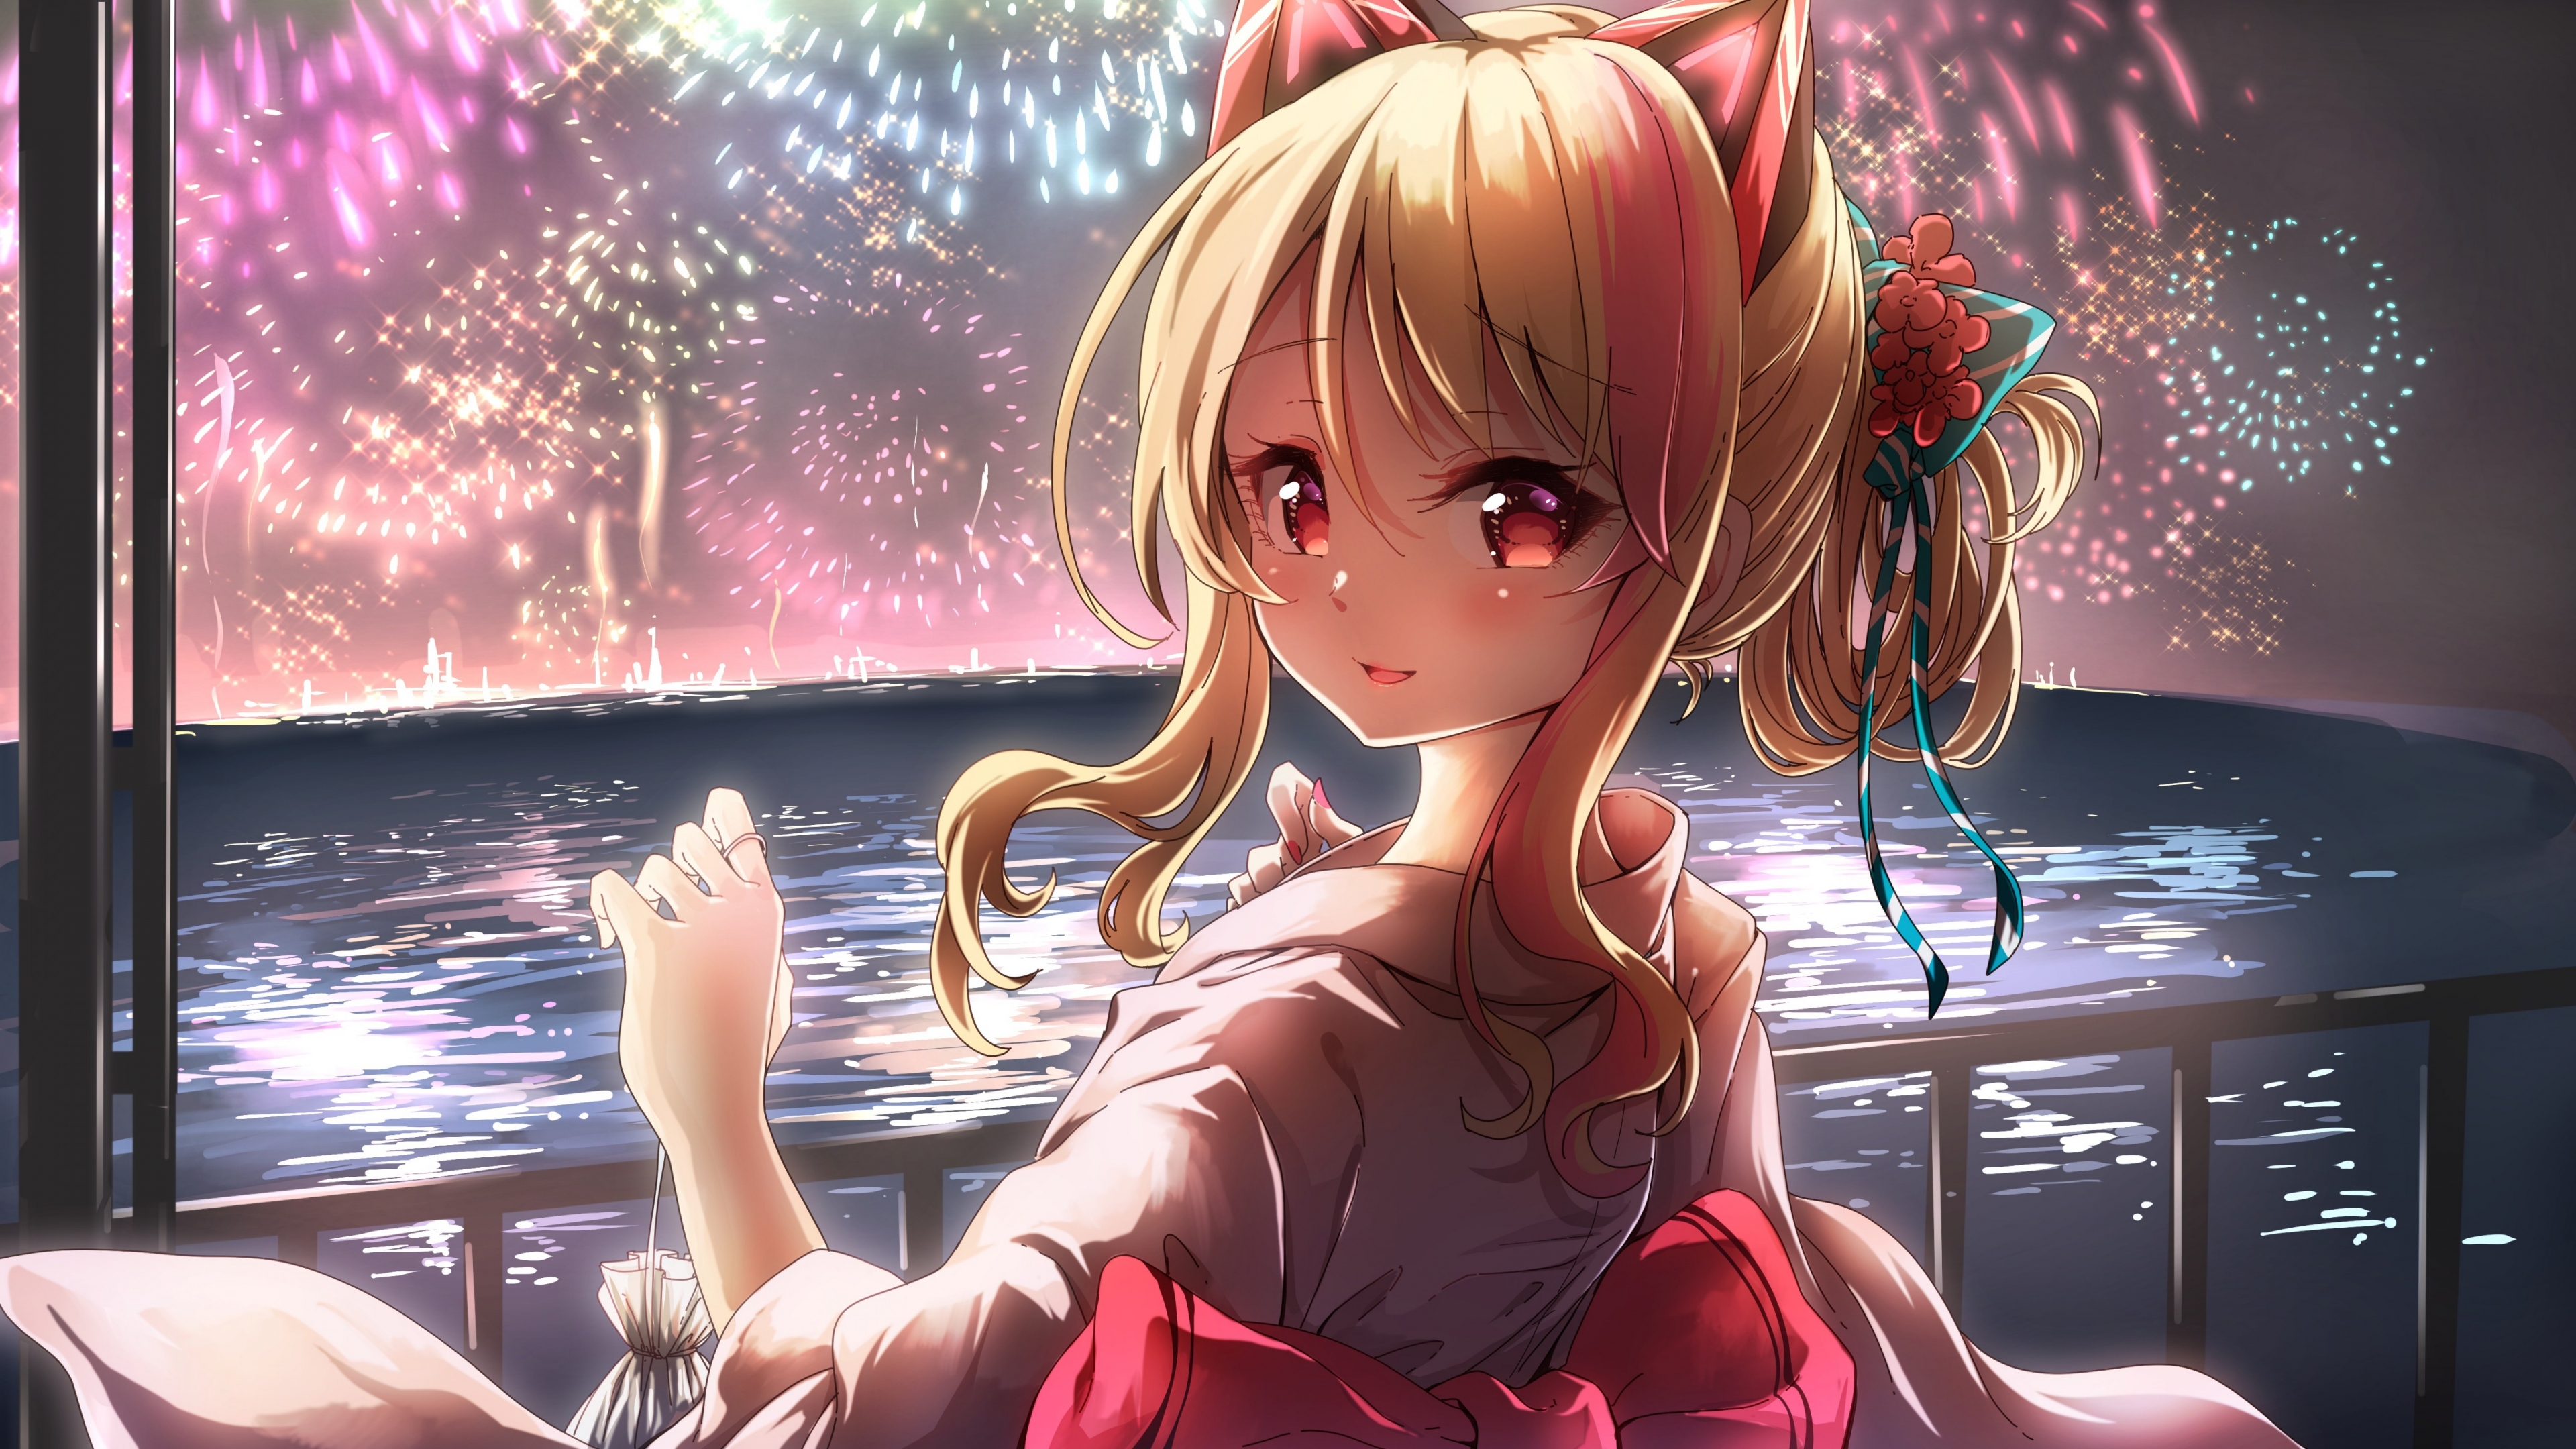 Anime Girl With Fireworks Wallpaper 5k Ultra Hd Id 3729